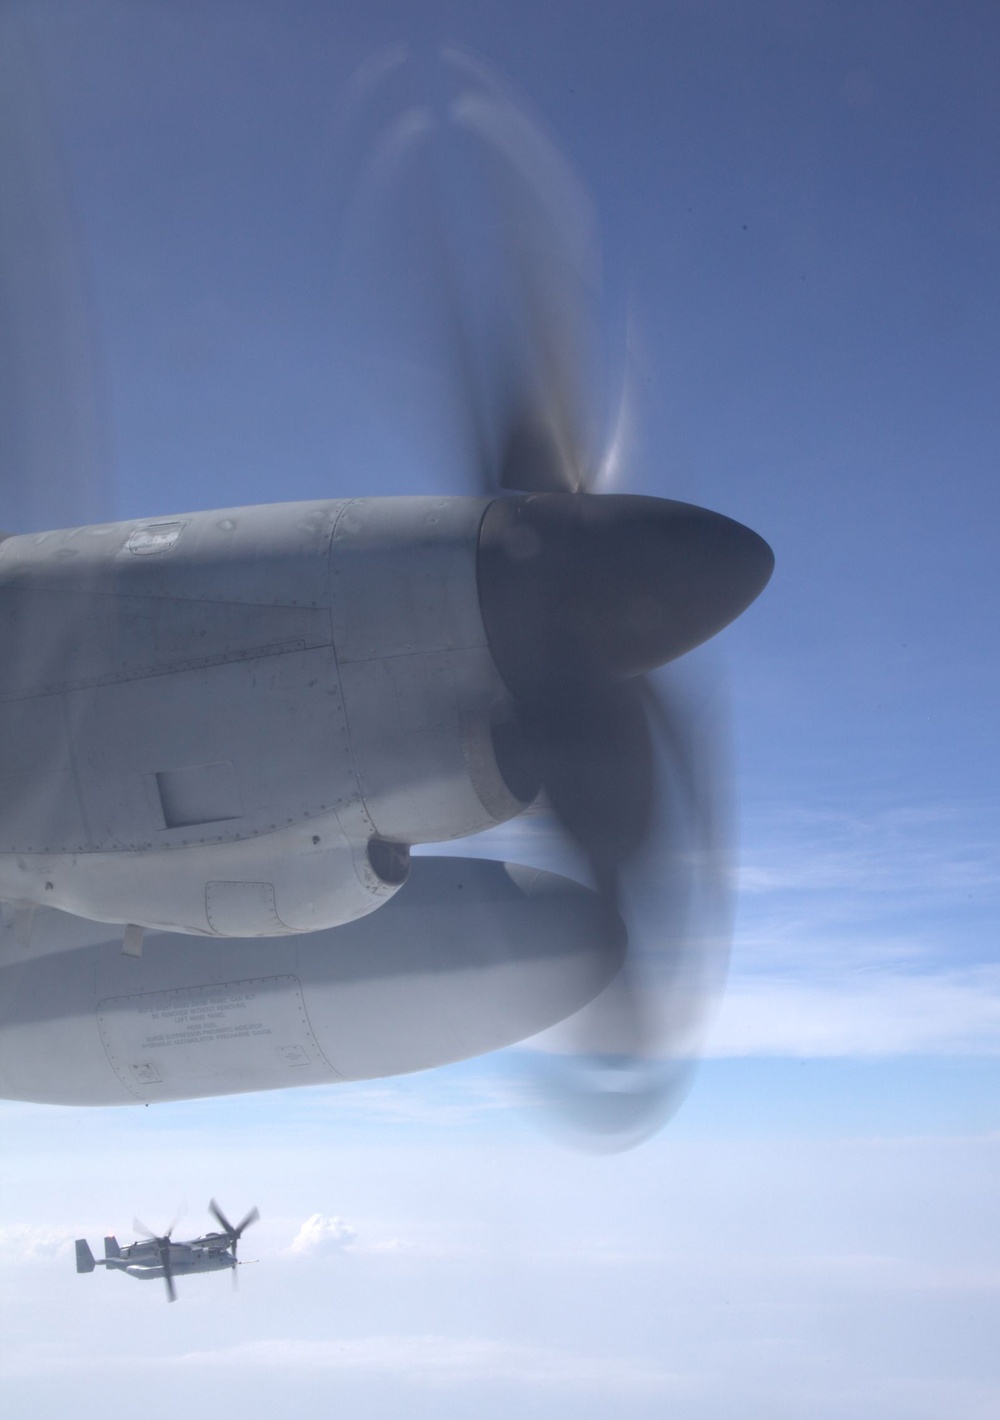 Fueling the flight: VMGR-252 fuels Ospreys on cross country mission